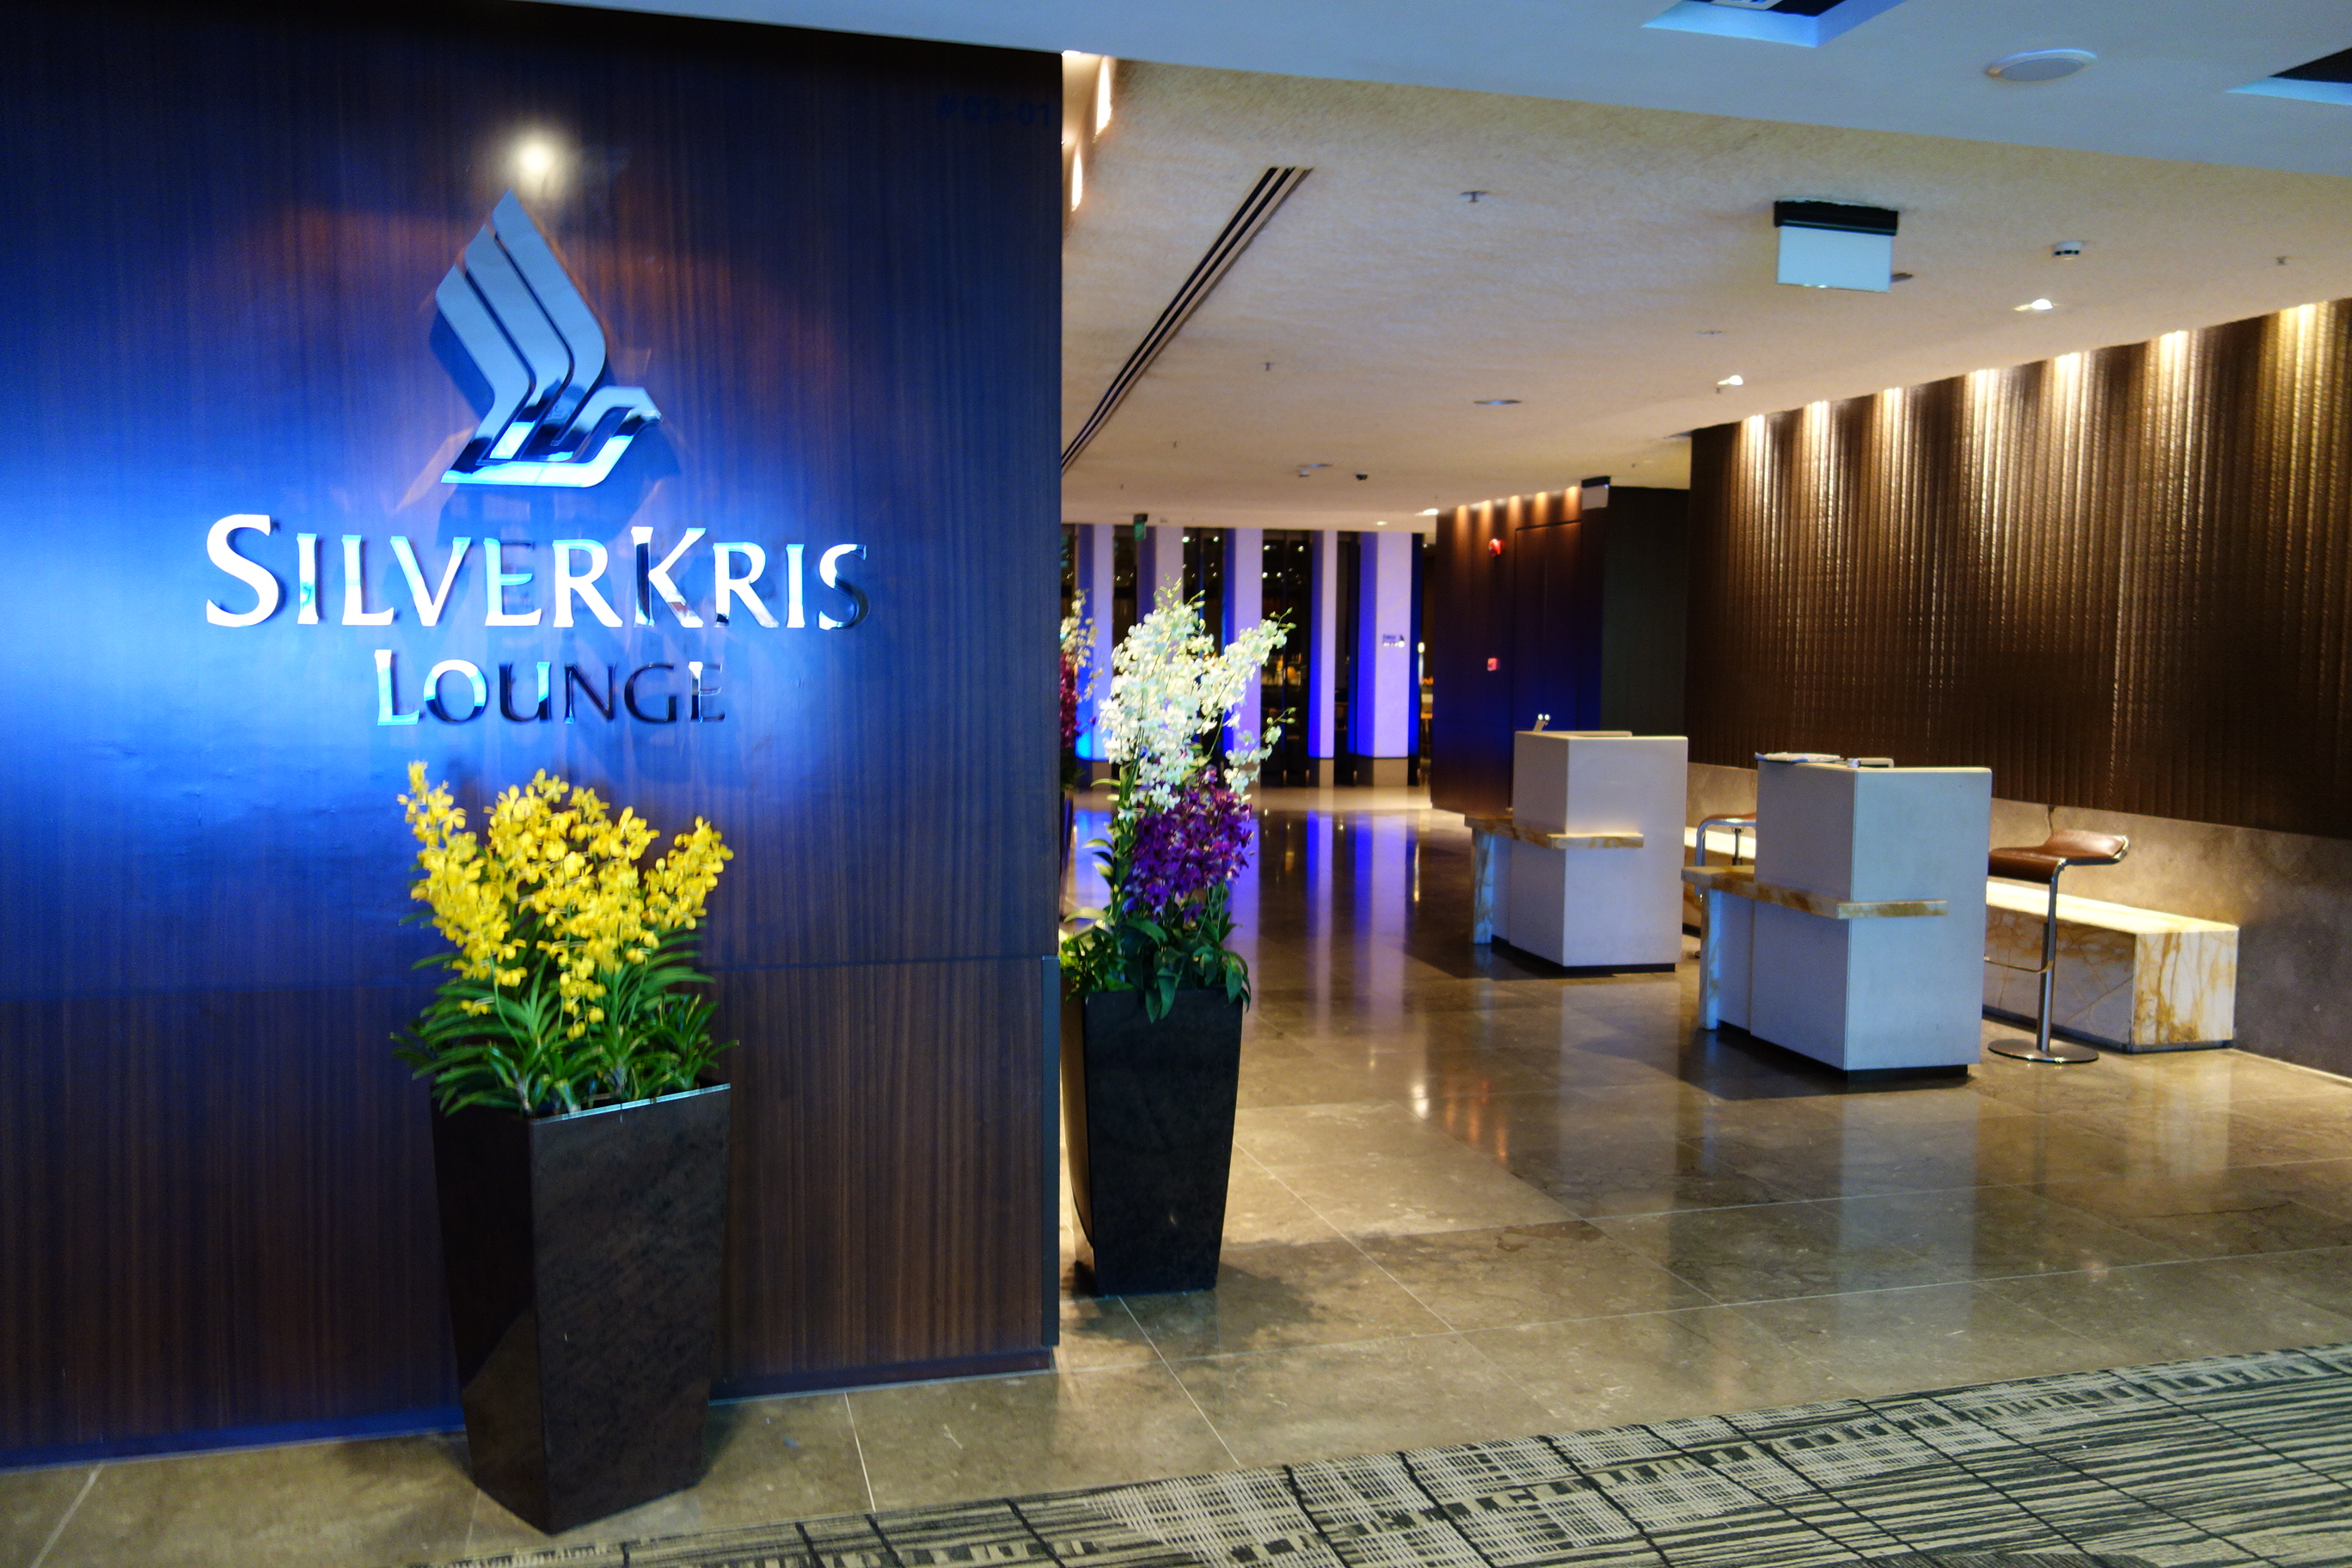 Entrance to the SilverKris Lounge in Terminal 3